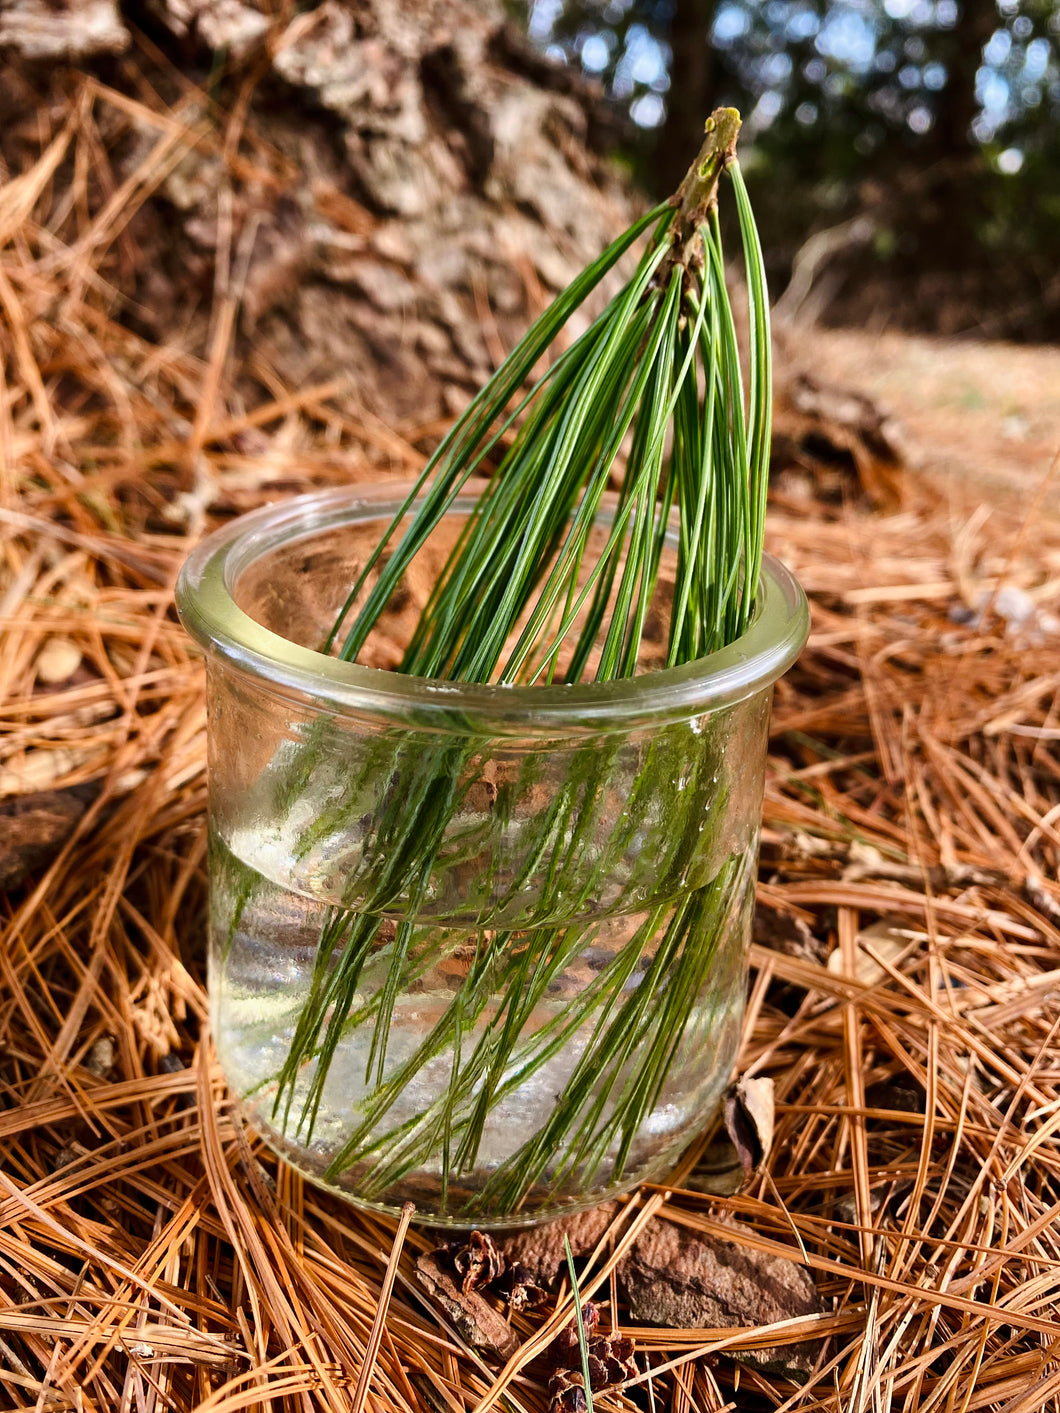 Pine Essence (For Self-blame, Guilt, Regret, and Feeling Responsible for Others’ Mistakes)